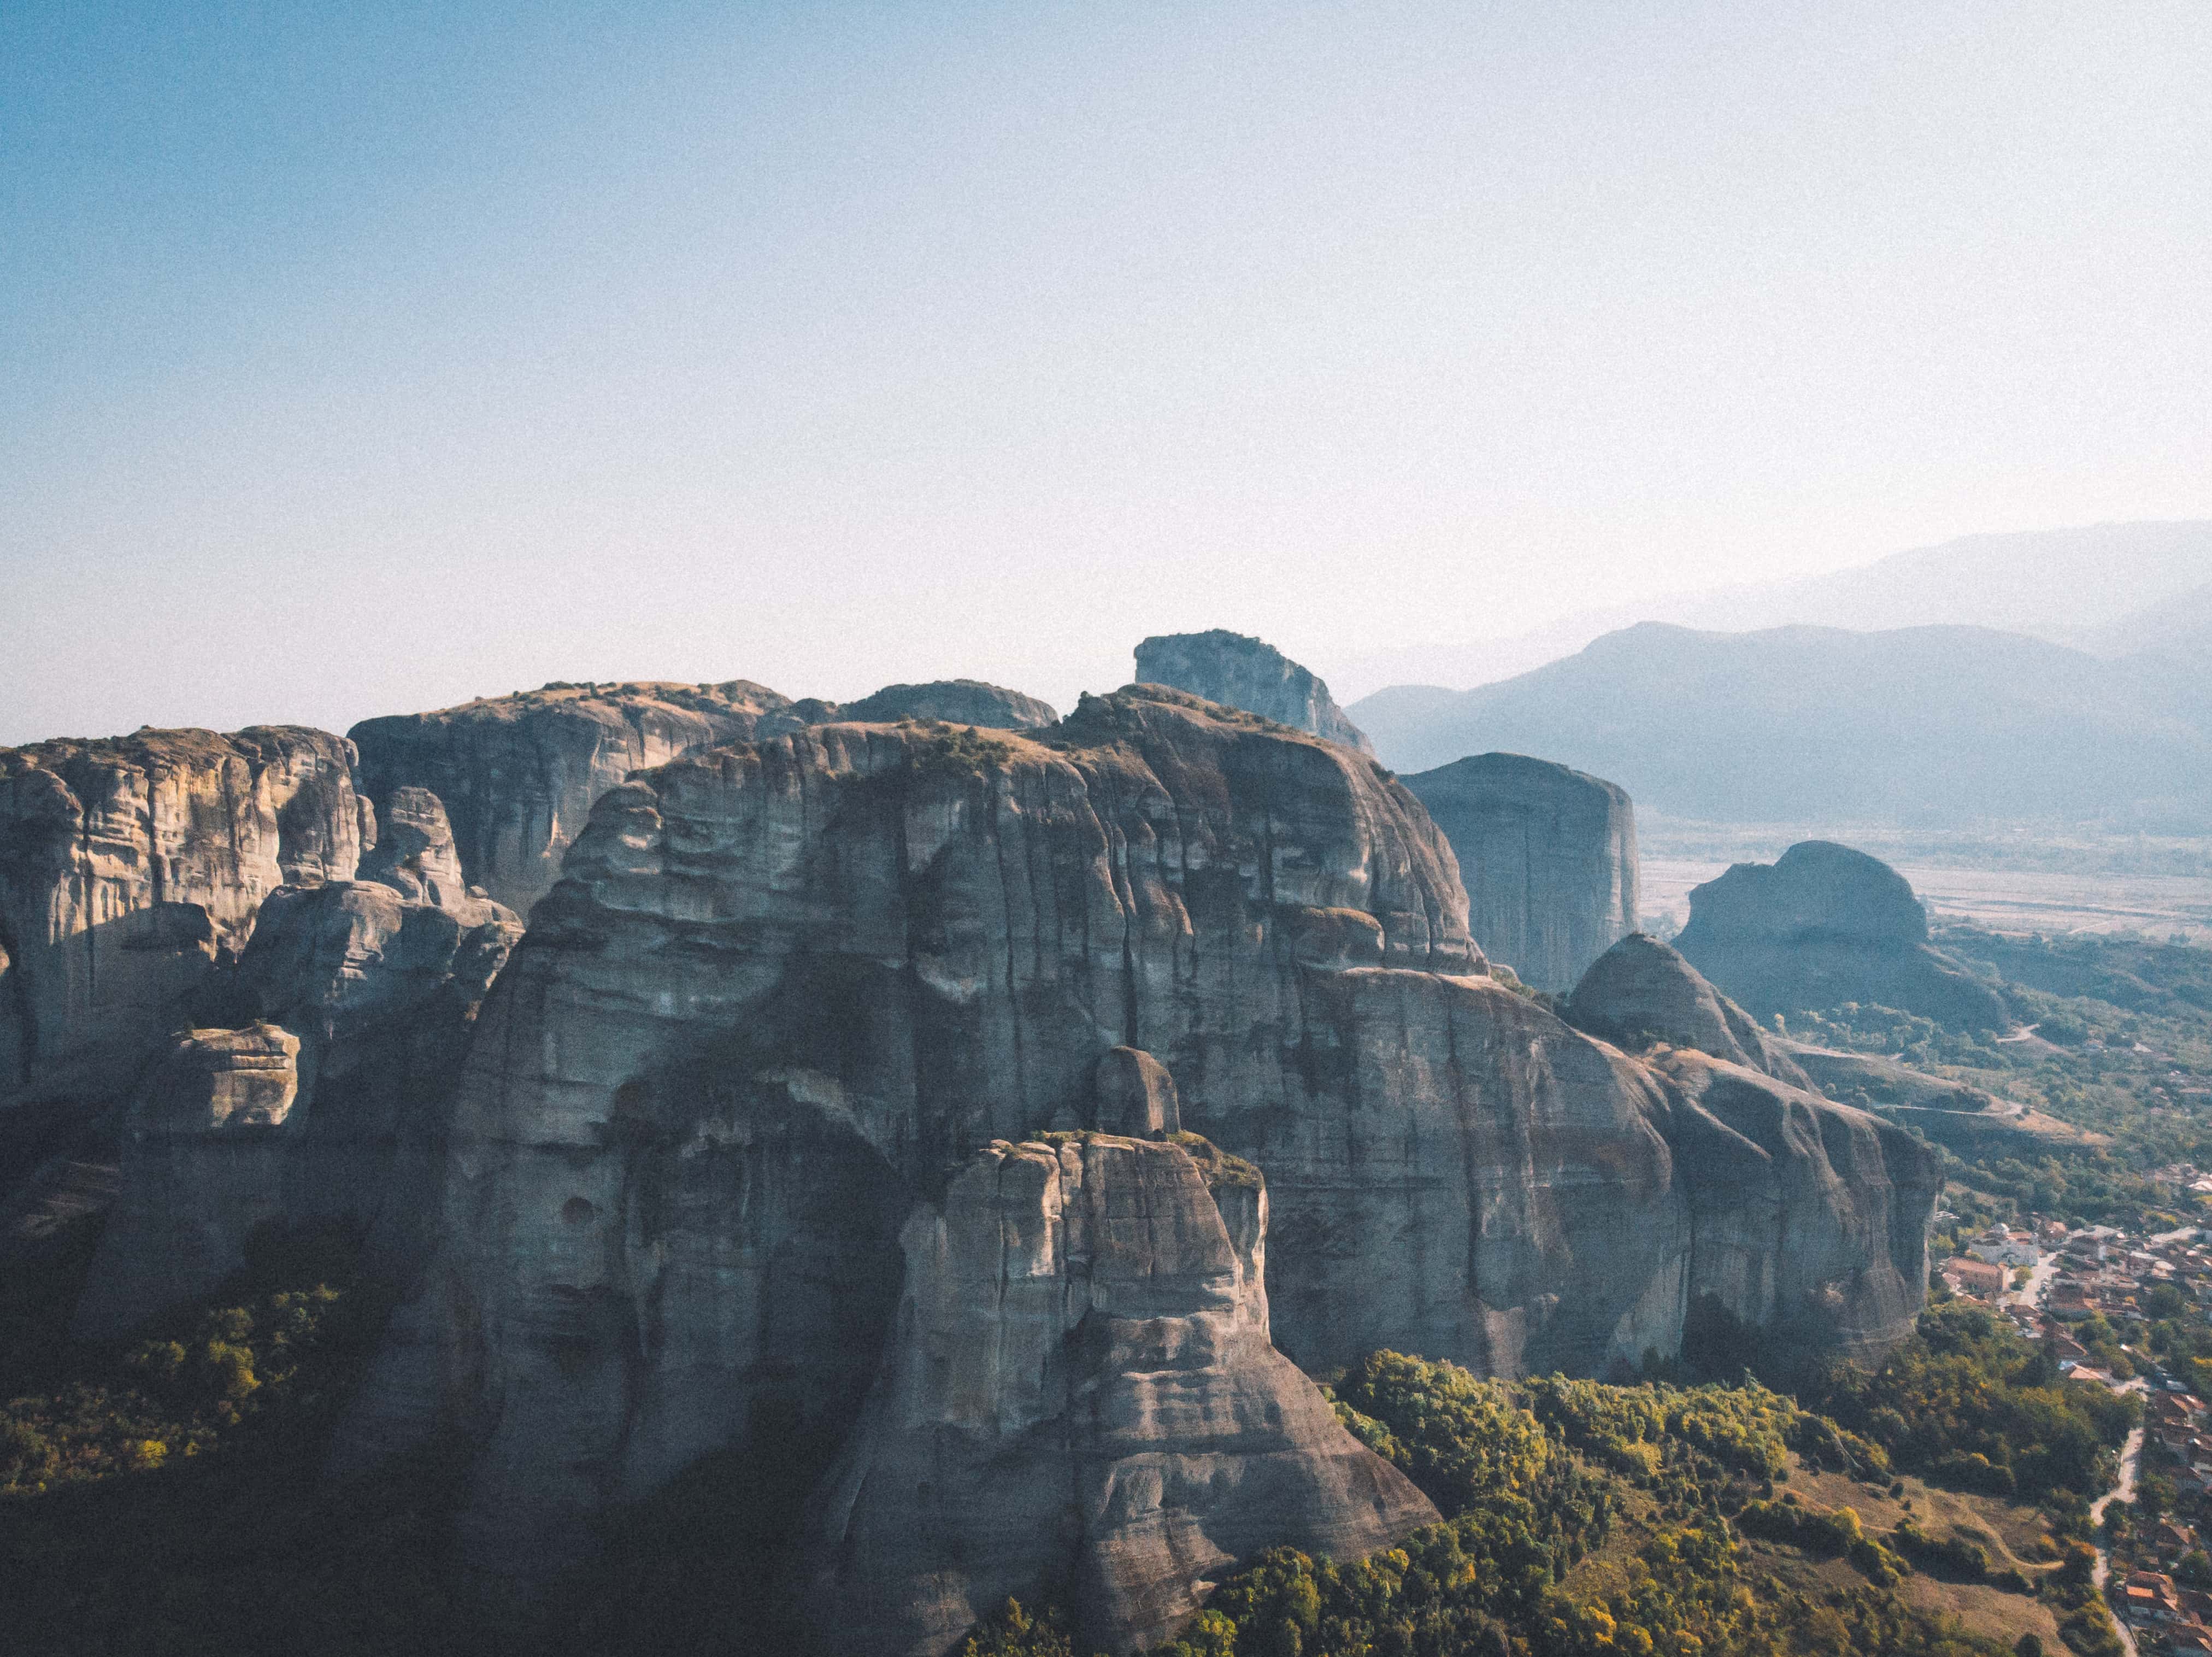 How to get to Meteora from Athens and how to get to Meteora from Thessaloniki. All things to do in Meteora, where to stay in Meteora, monasteries to visit in Meteora